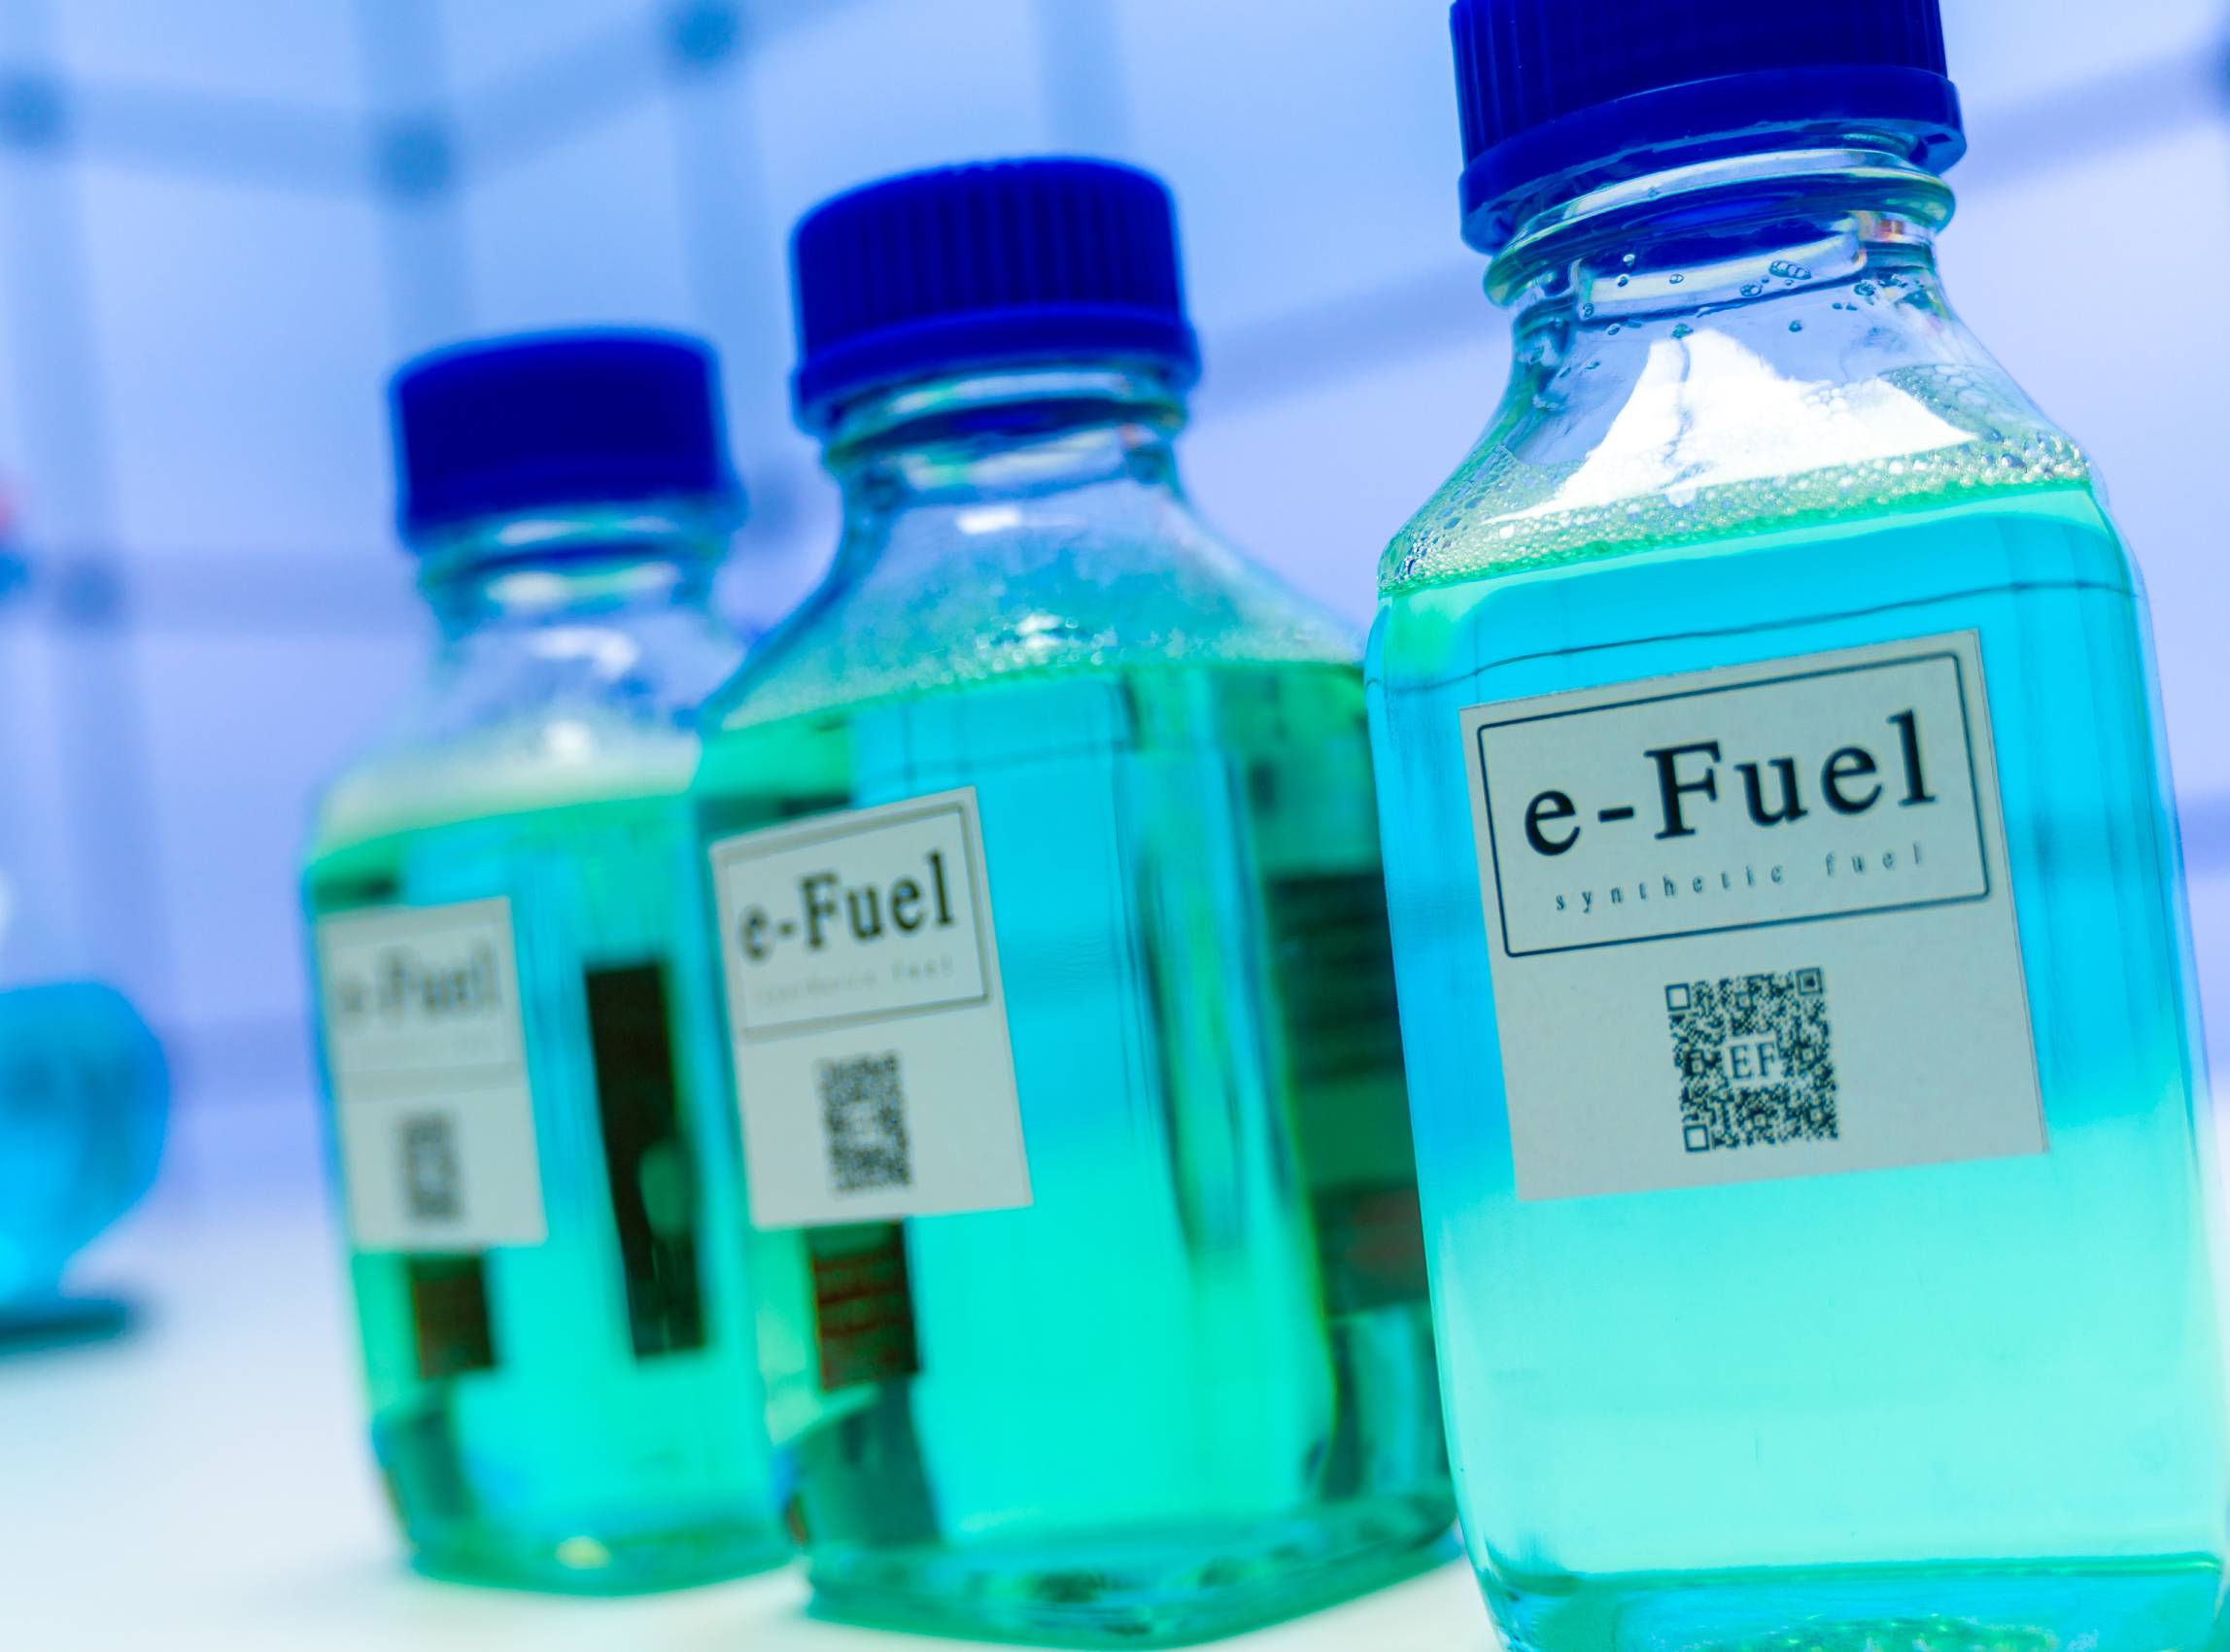 Electrofuels or e-fuels or synthetic fuels are an emerging class of carbon neutral fuels that are made from renewable sources. Photo ID 266560582 © Luchschen | Dreamstime.com